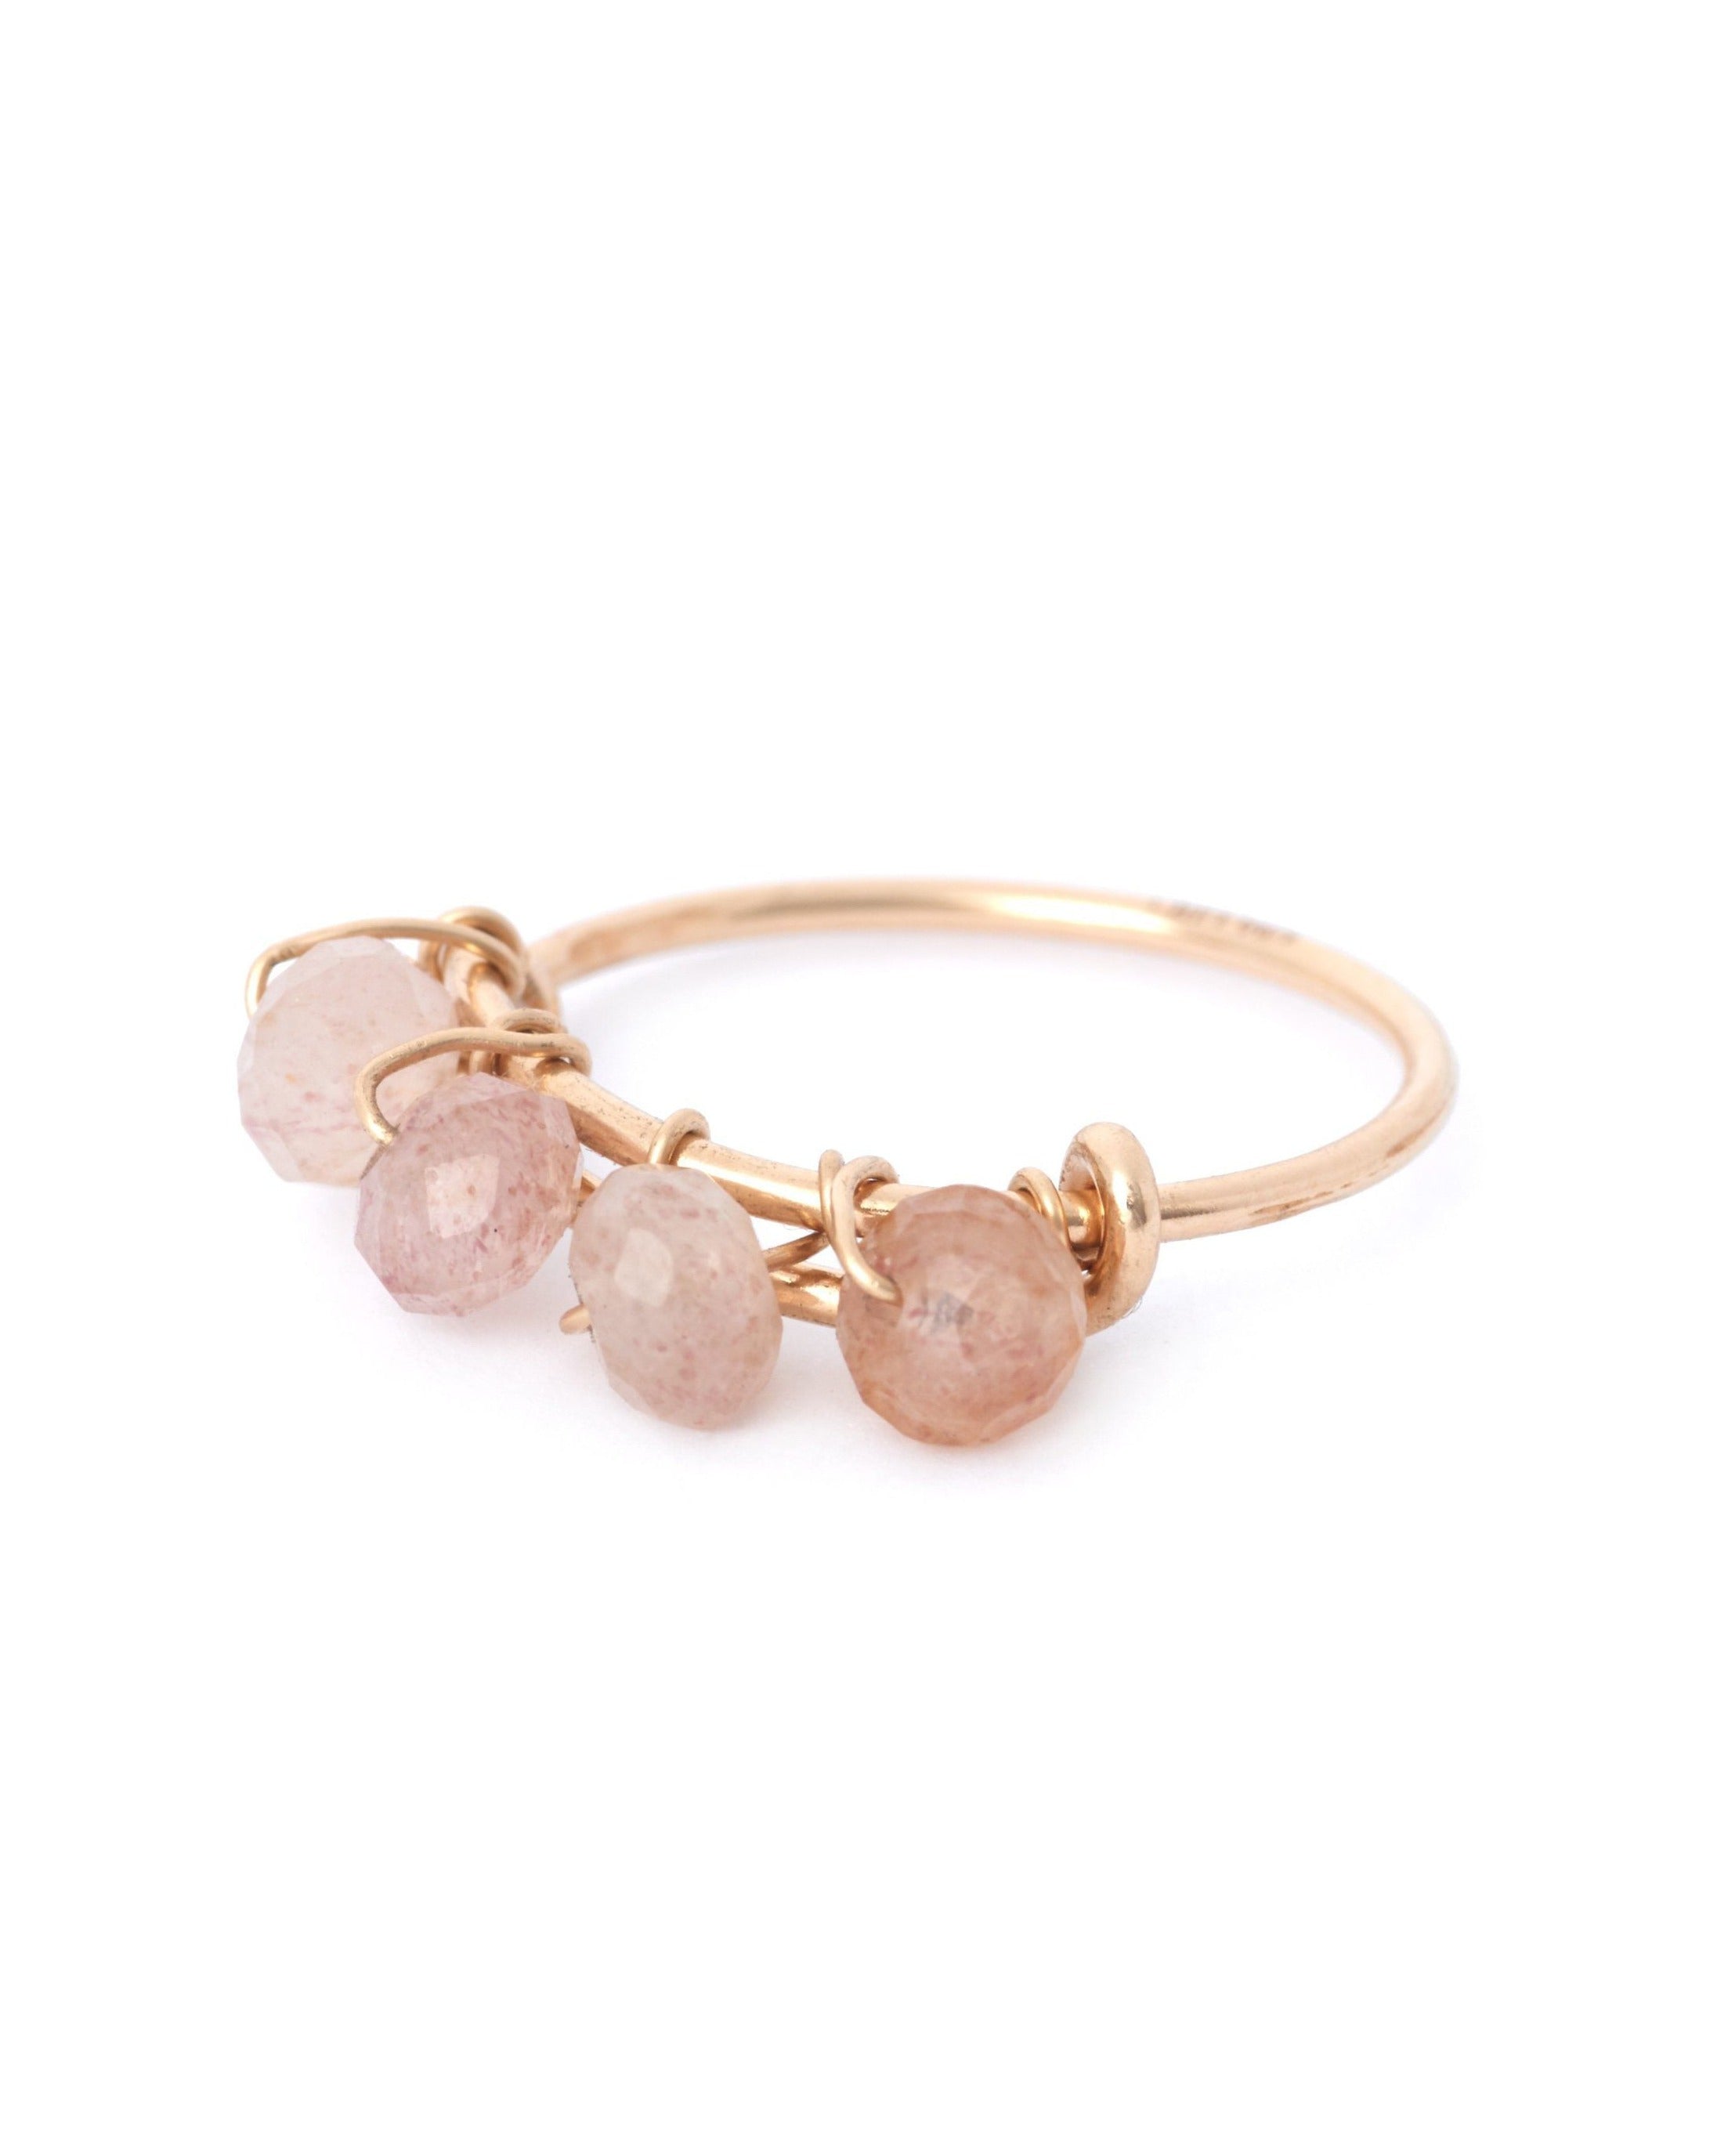 Gem Braided Ring by KOZAKH. A 1mm thick ring, crafted in 14K Gold Filled, featuring braided Rose Quartz gems.